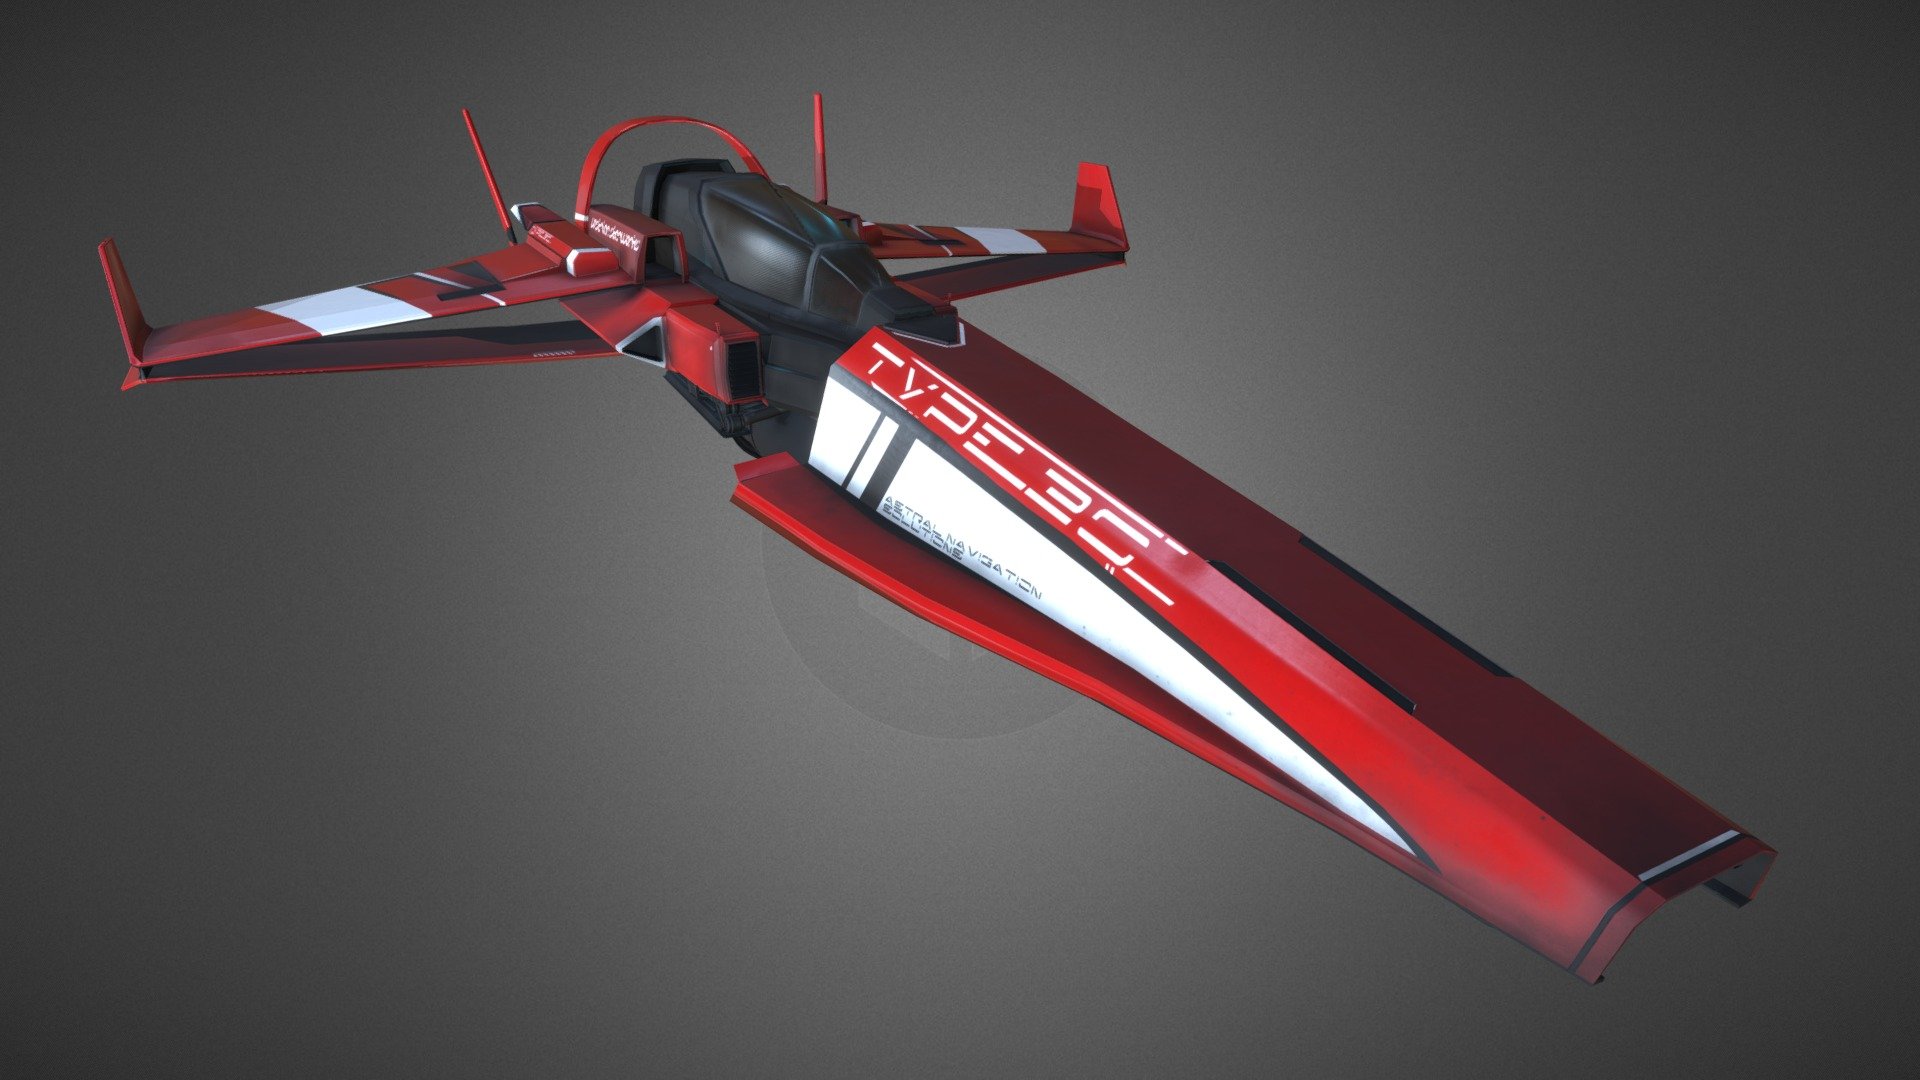 A second-year university project where I designed, modeled, and textured my own sci-fi racing ship inspired by wipEout 3d model